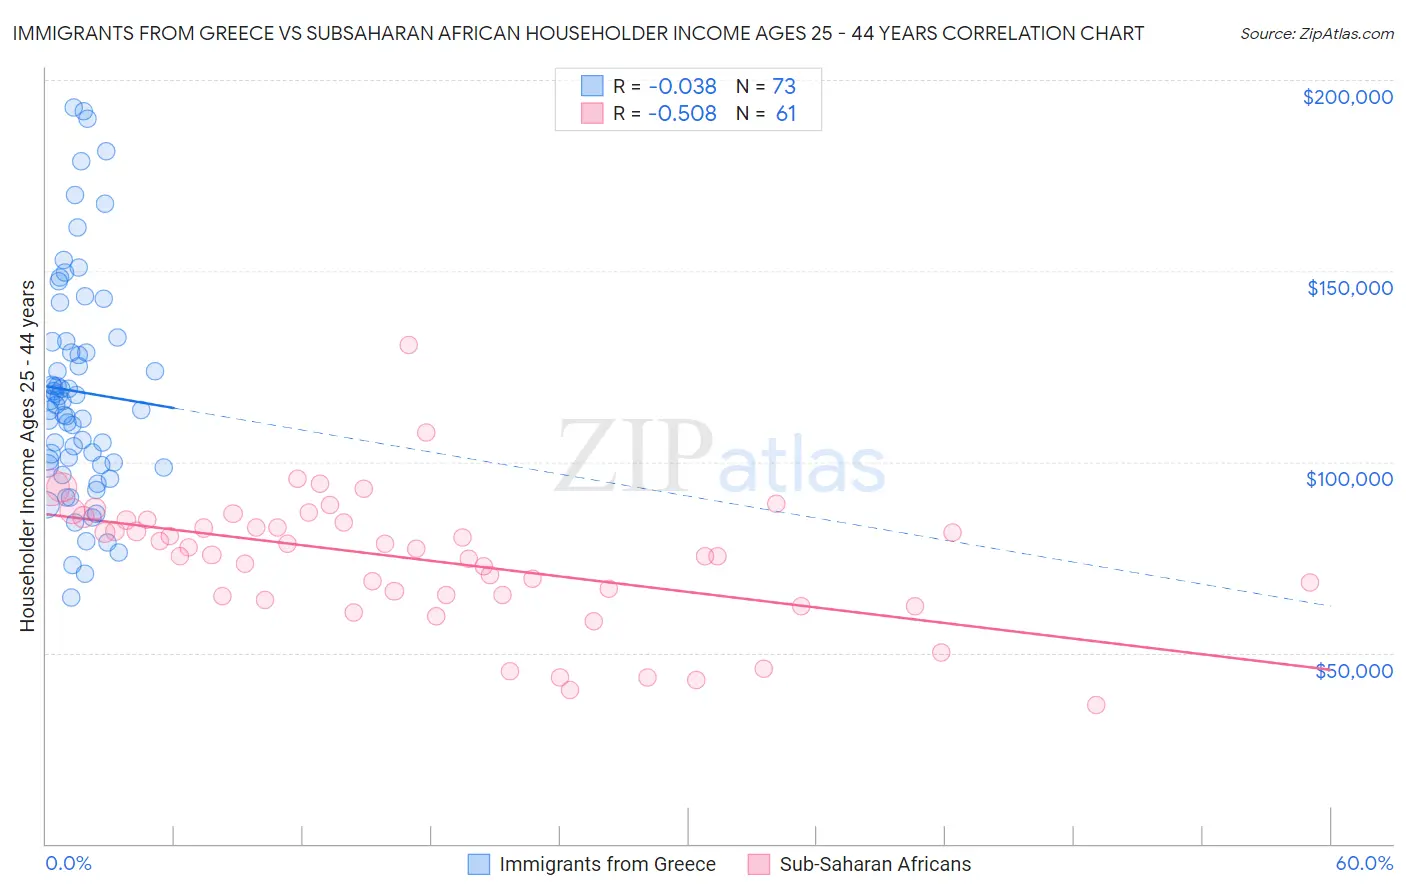 Immigrants from Greece vs Subsaharan African Householder Income Ages 25 - 44 years